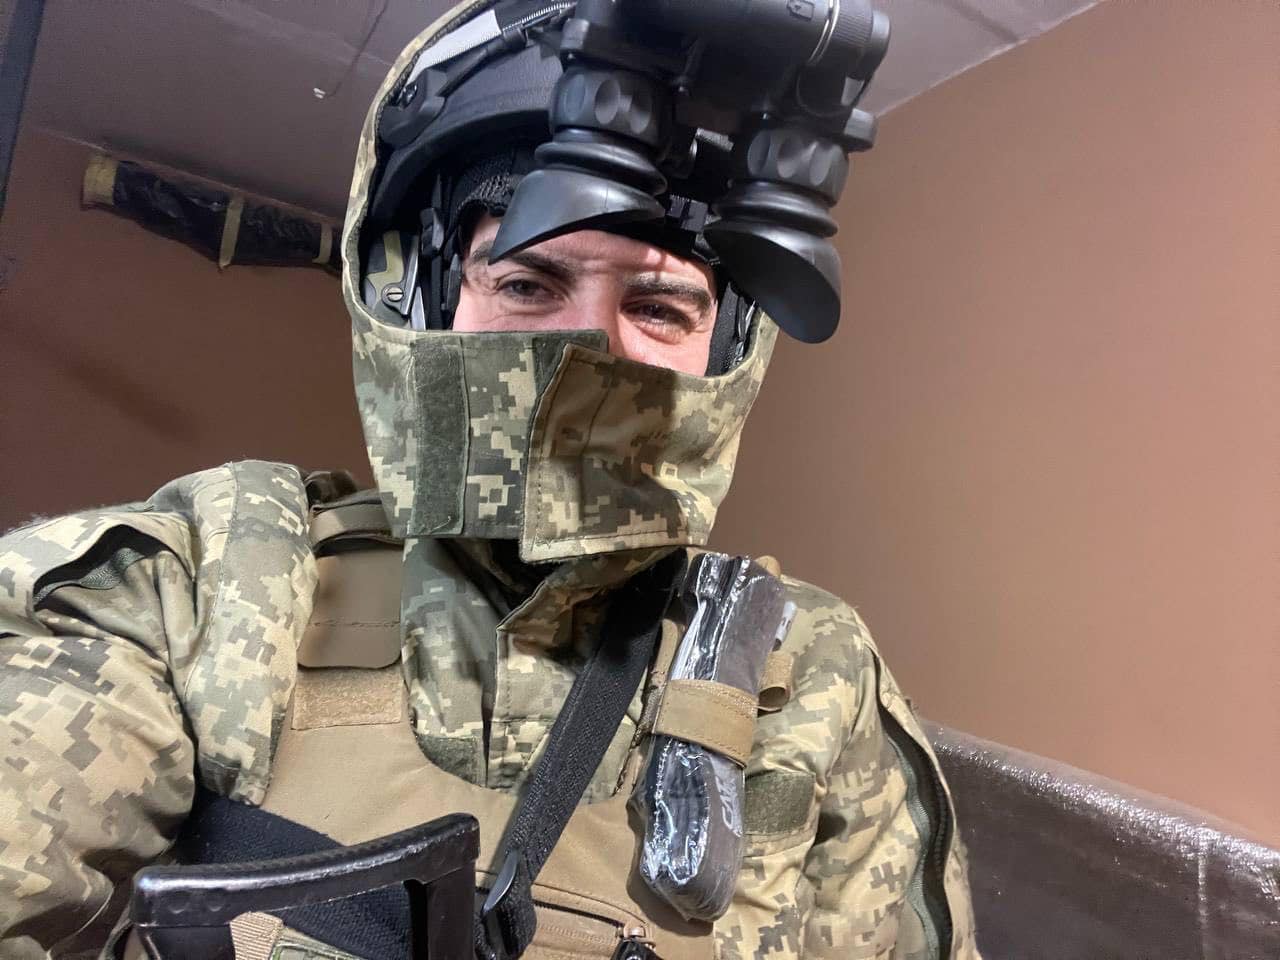 Delivering Tactical Gear That Saves Lives United With Ukraine sources life-saving medical, tactical, and humanitarian supplies and operates through a network of local organizations